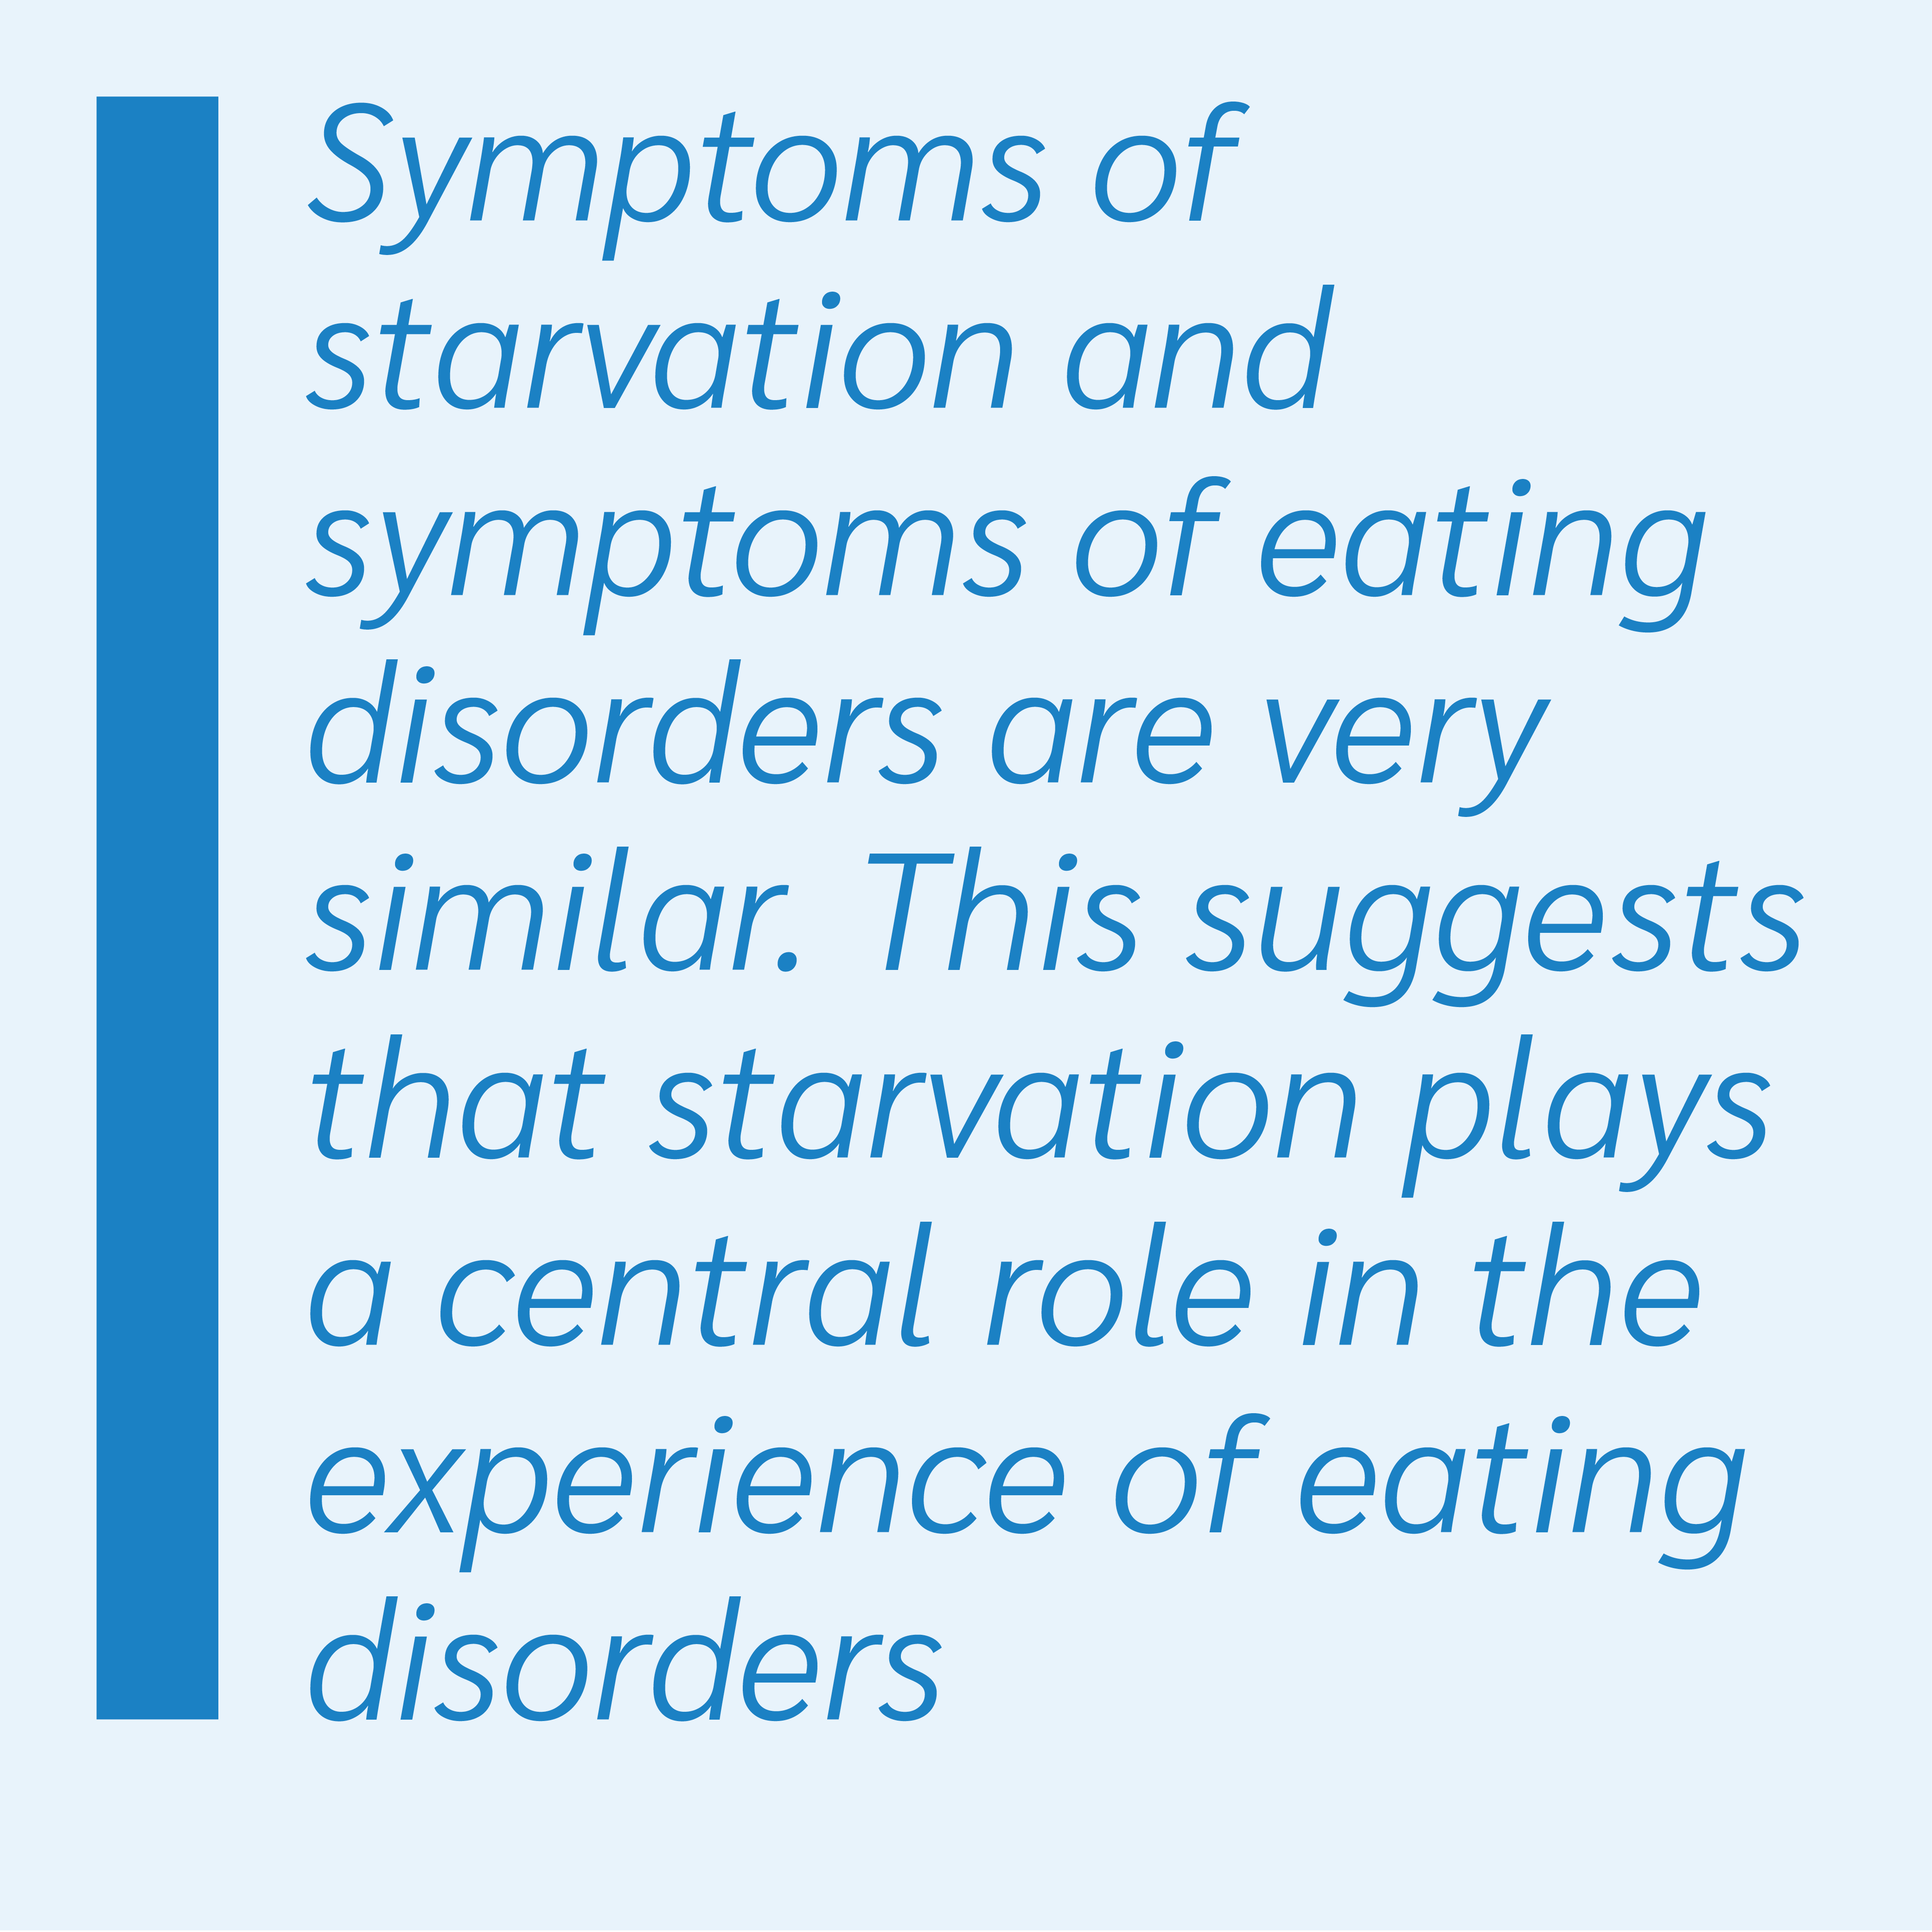 Symptoms of starvation and symptoms of eating disorders are very similar. This suggests that starvation plays a central role in the experience of eating disorders.